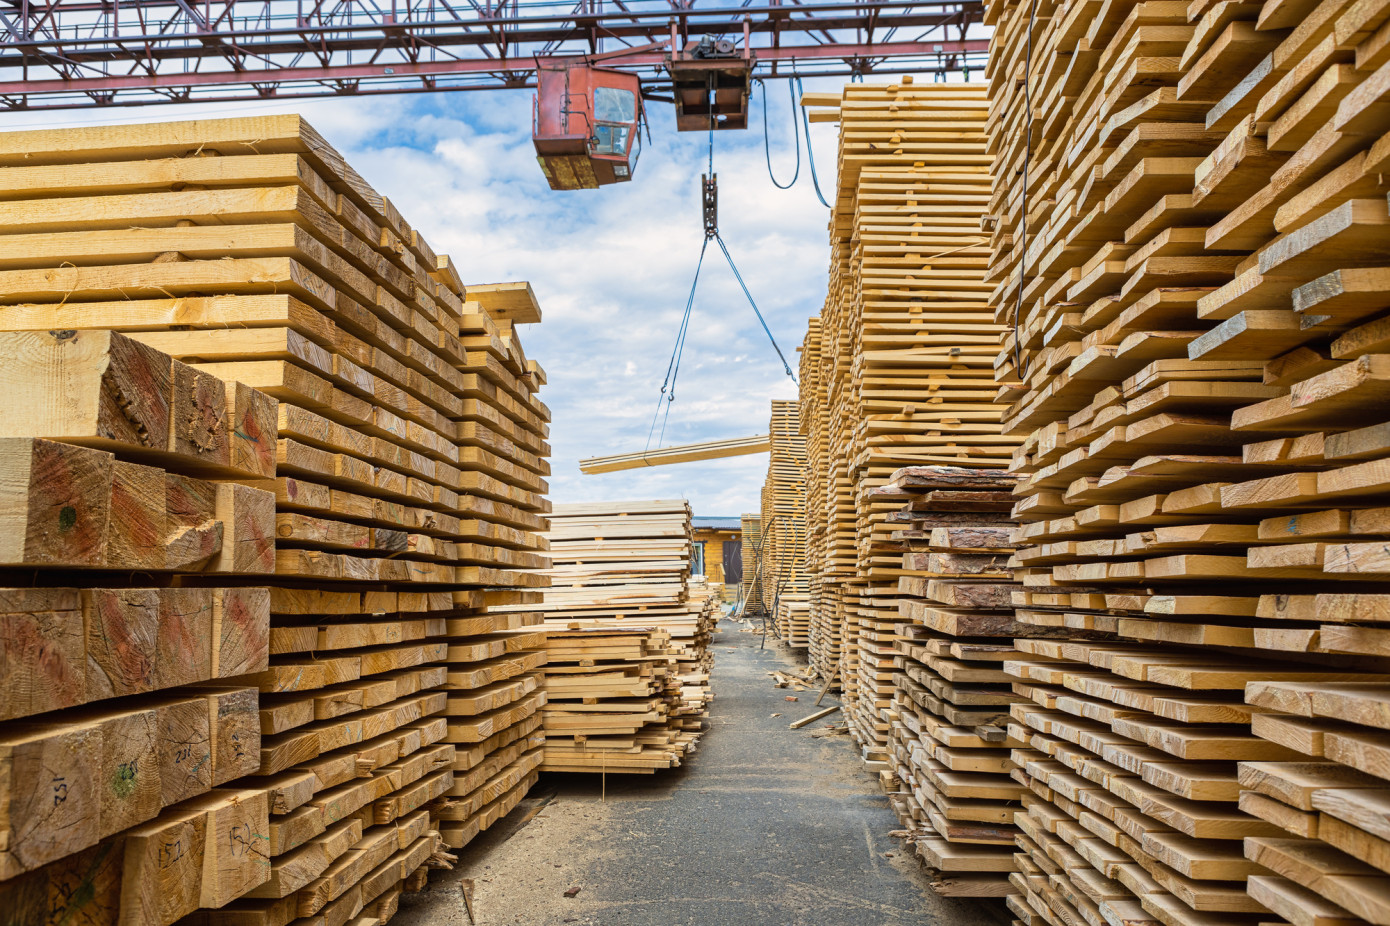 Sawmills continue to cut production, but lumber prices are not rising